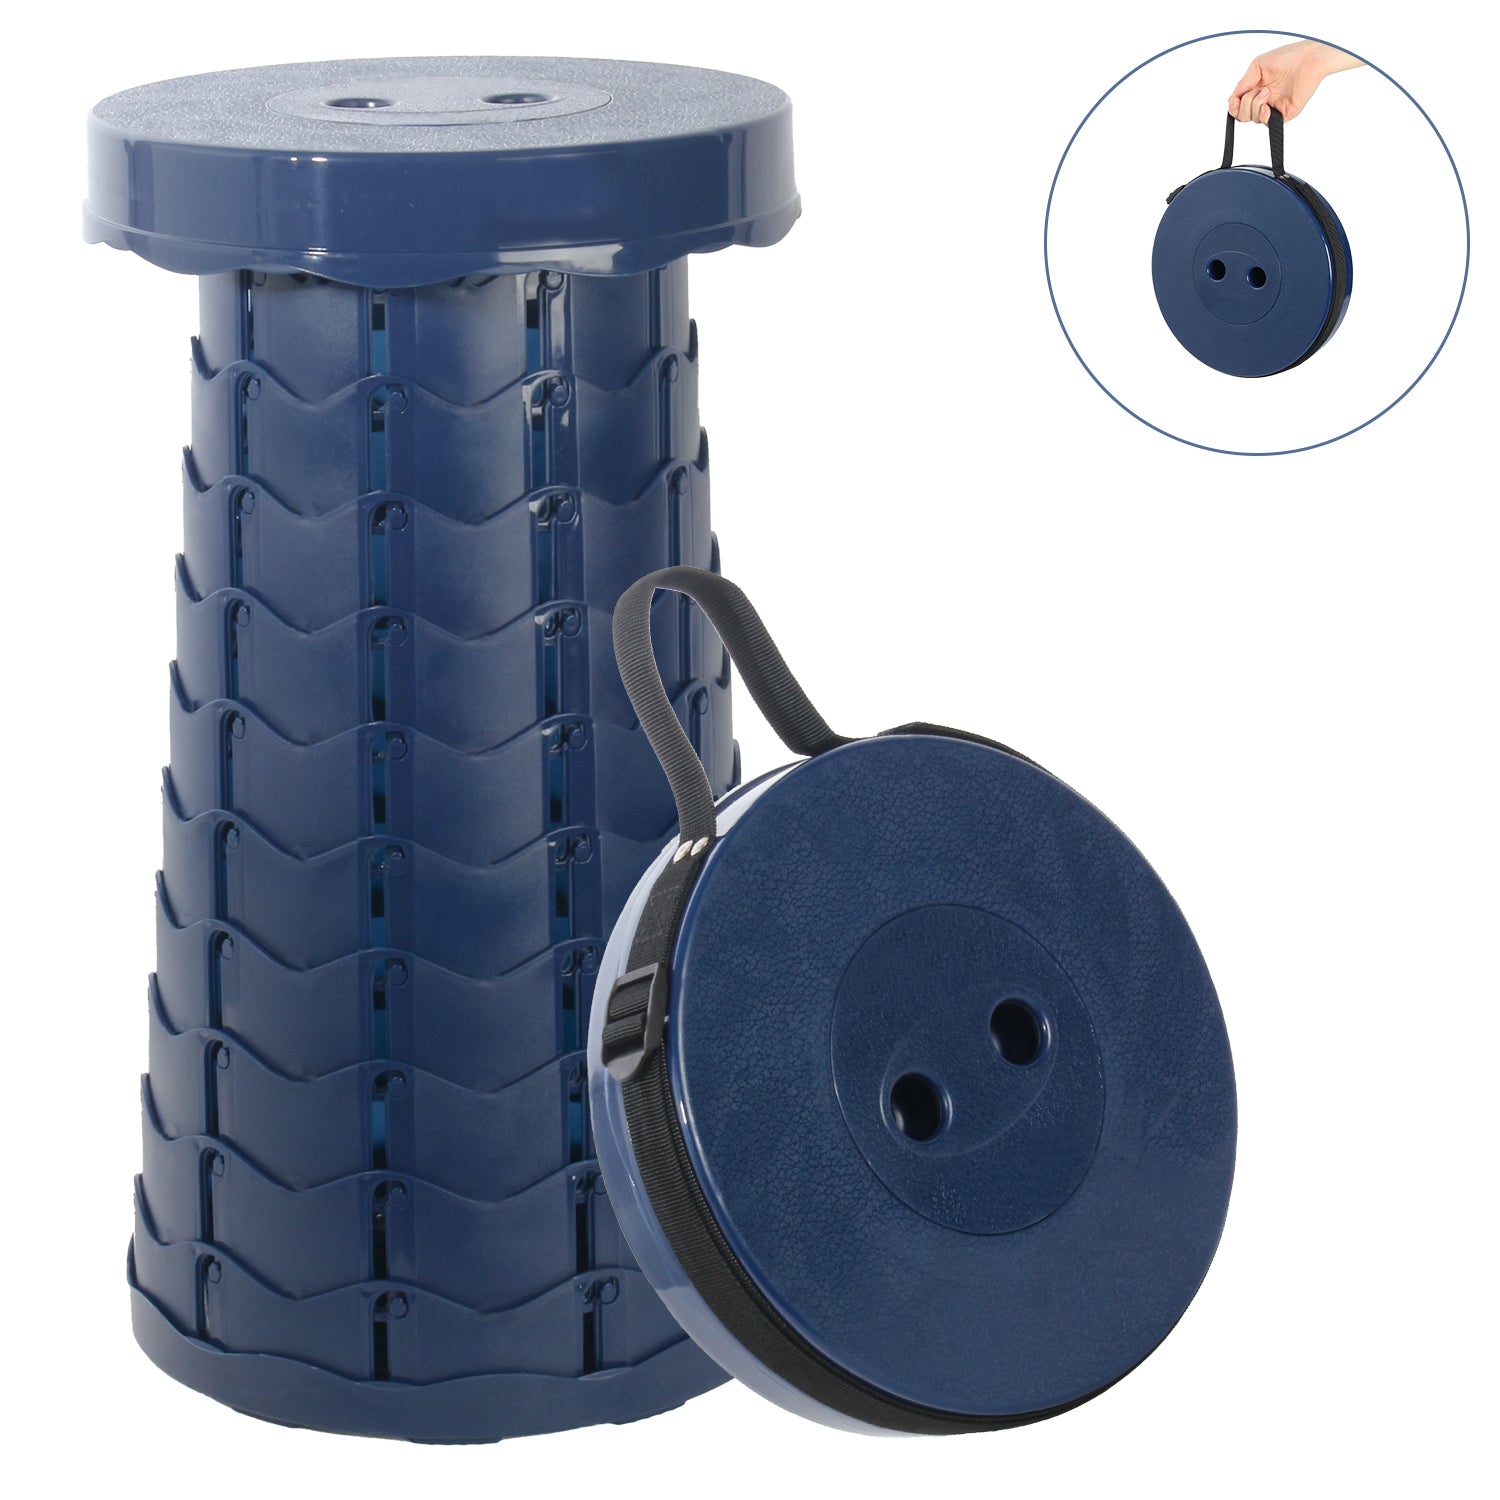 Leogreen-Portable-Telescopic-Stool-Plastic-Foldable-Stool-Portable-Folding-Seat-for-Fishing-BBQ-Camping-Gardening-Indoor-Kitchen-Max-Load-150KG-Navy-Blue